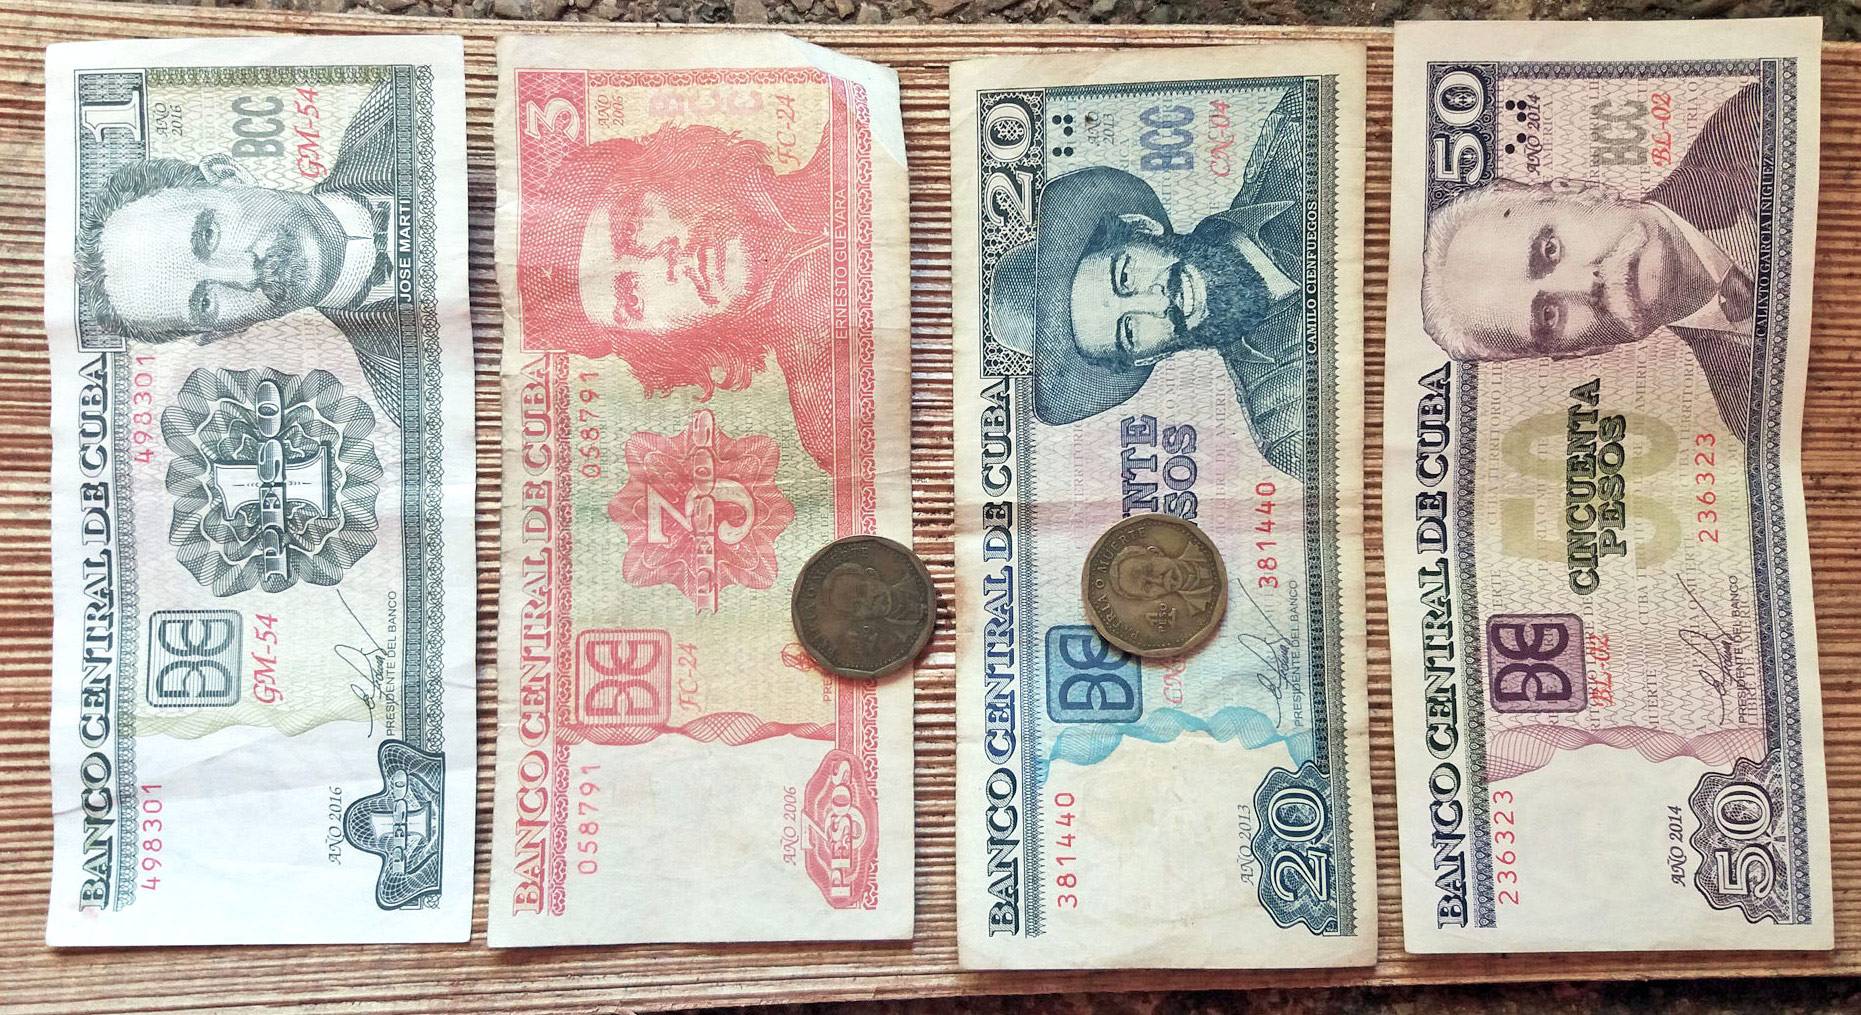 500 Cuban Pesos (CUP) to US Dollars (USD) - Currency Converter